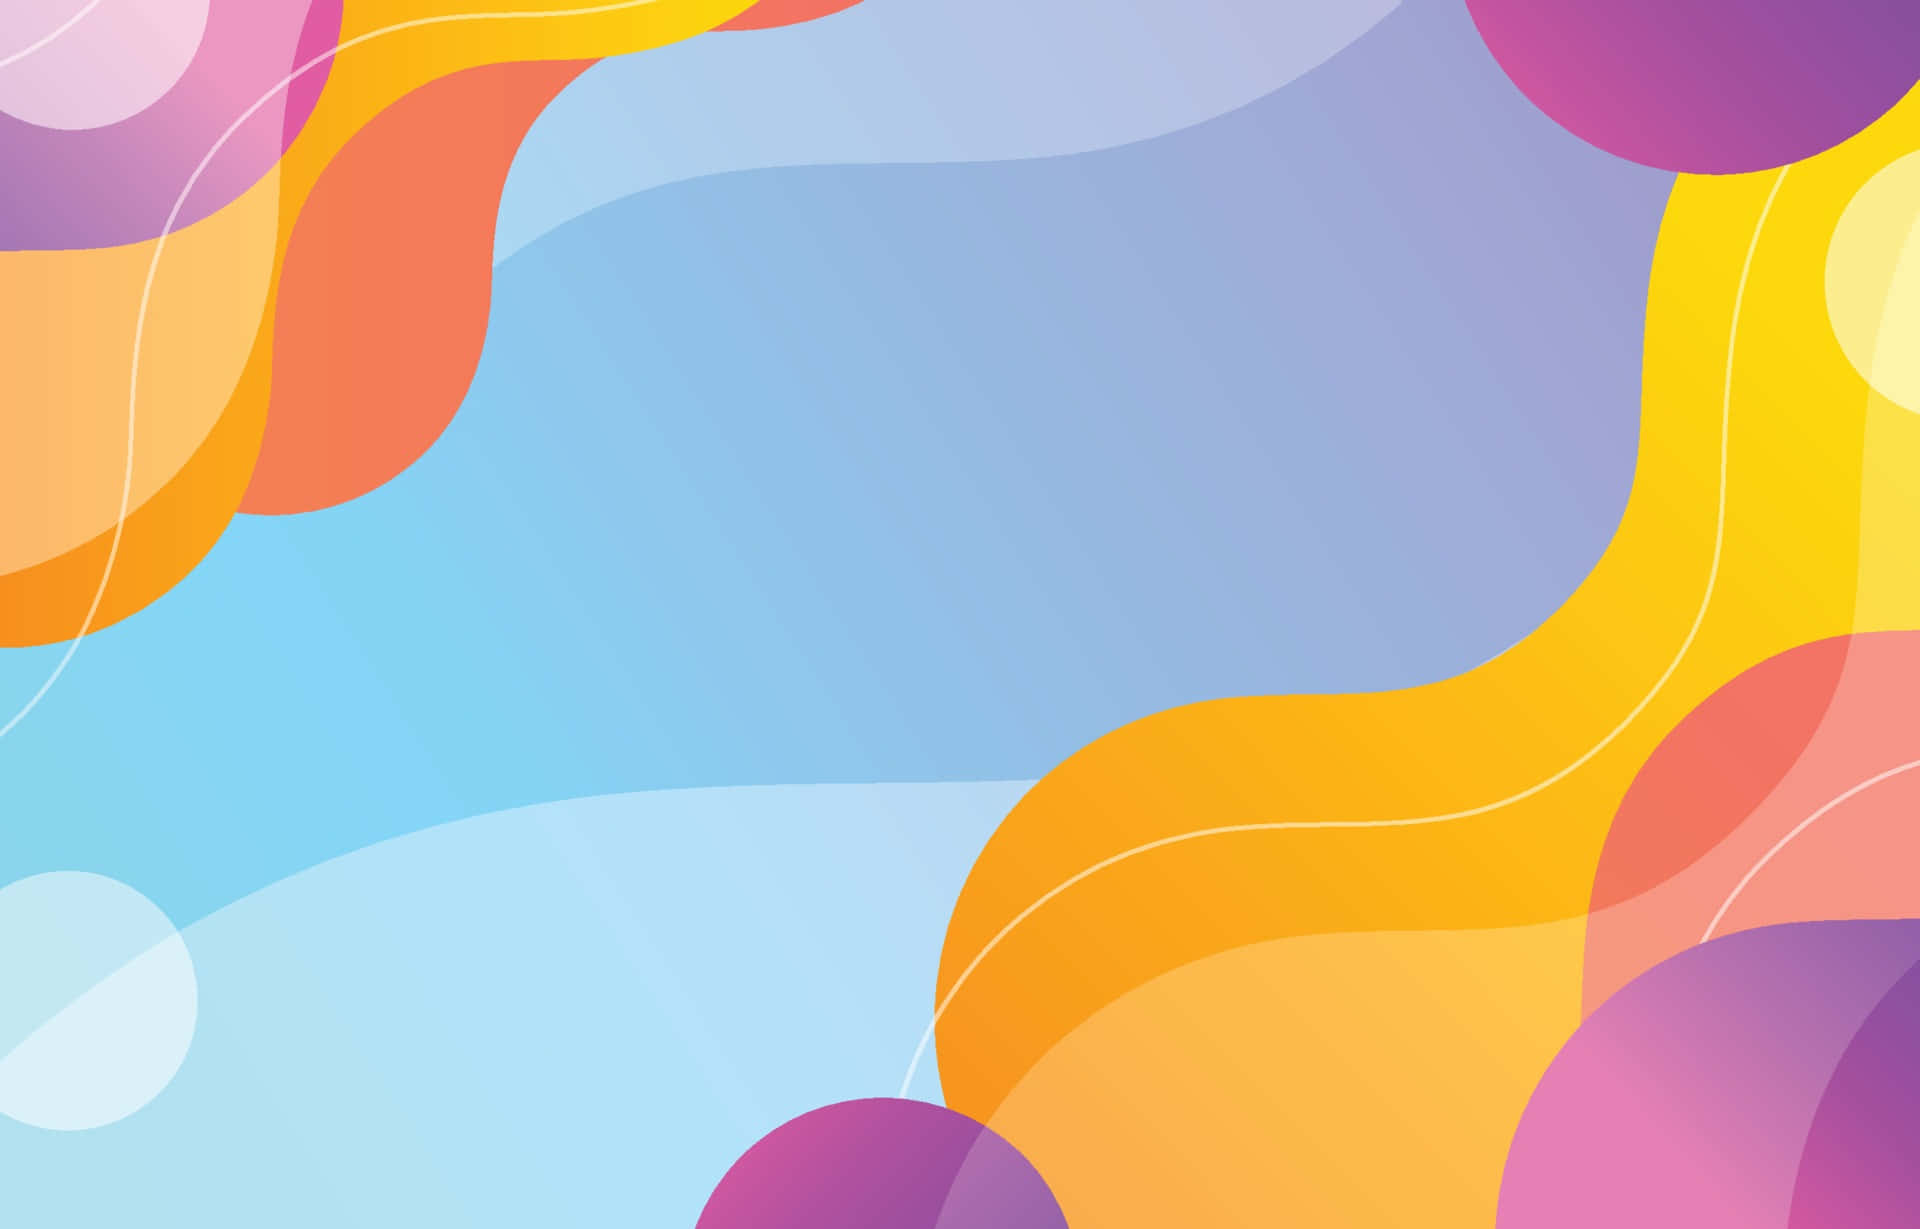 100+] Colorful Abstract Background s 